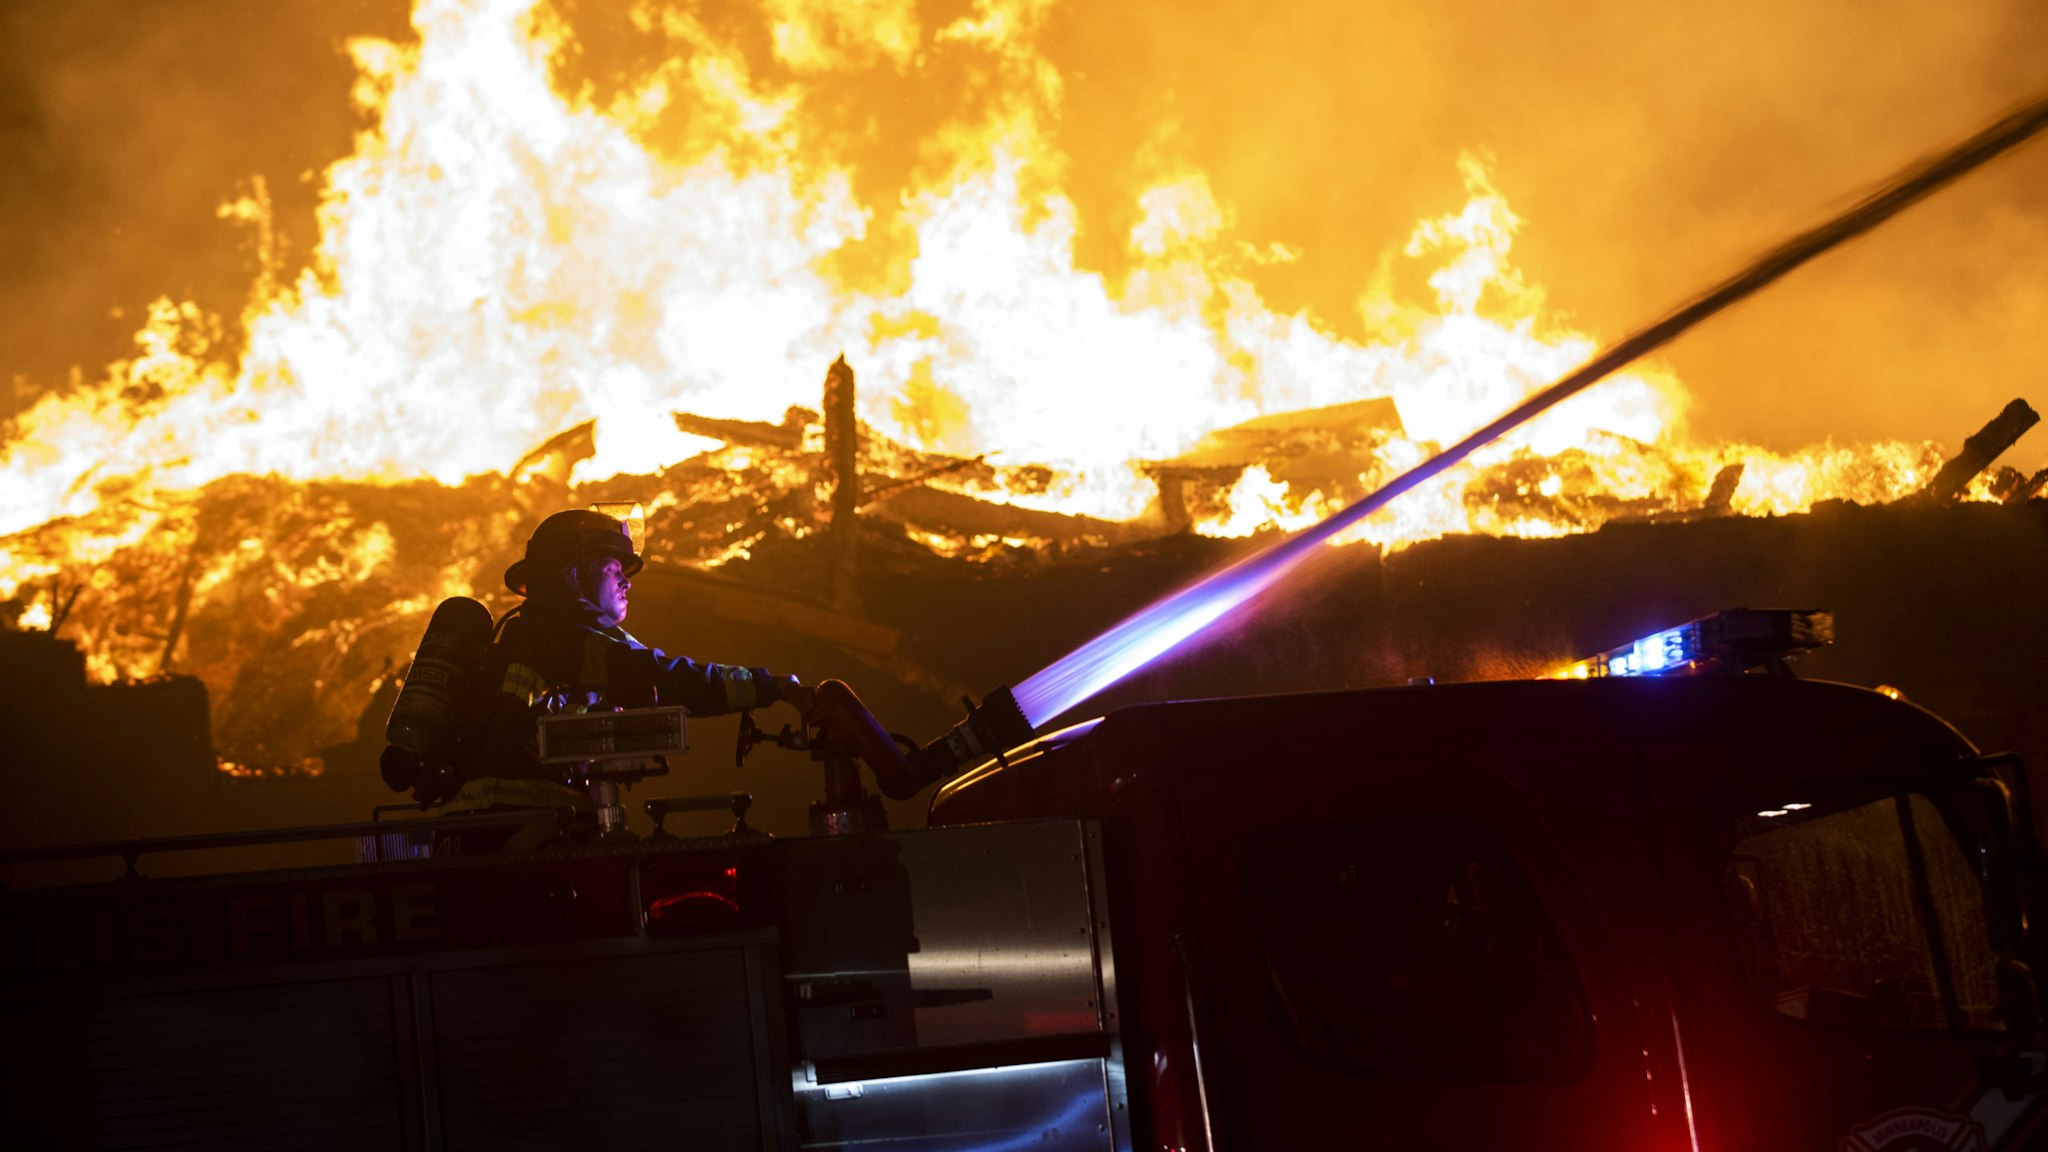 MINNEAPOLIS, MN - MAY 27: Fire fighters work to put out a fire at a factory near the Third Police Precinct on May 27, 2020 in Minneapolis, Minnesota. A number of businesses and homes were damaged as the area has become the site of an ongoing protest after the police killing of George Floyd. Four Minneapolis police officers have been fired after a video taken by a bystander was posted on social media showing Floyd's neck being pinned to the ground by an officer as he repeatedly said, "I can’t breathe". Floyd was later pronounced dead while in police custody after being transported to Hennepin County Medical Center.